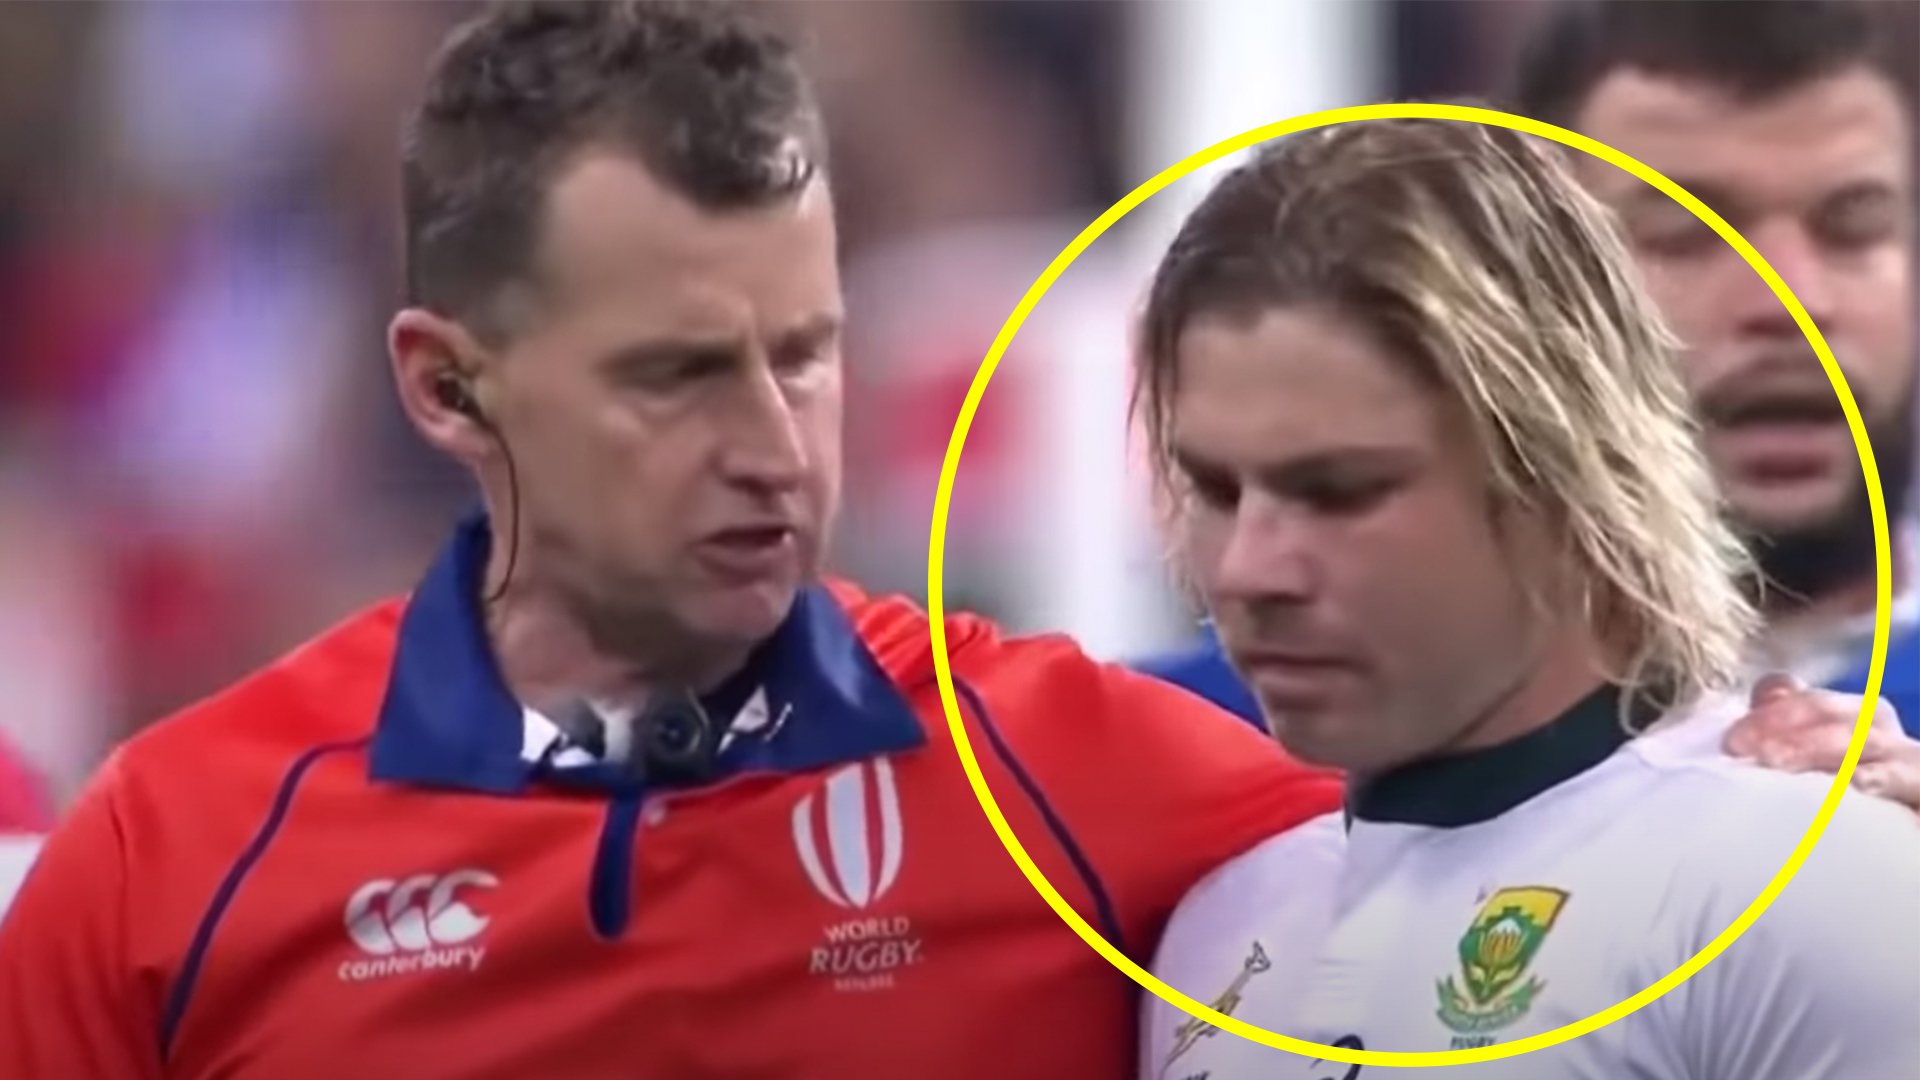 The way in which rugby referee Nigel Owens masterfully manages players on the field is displayed in new compilation